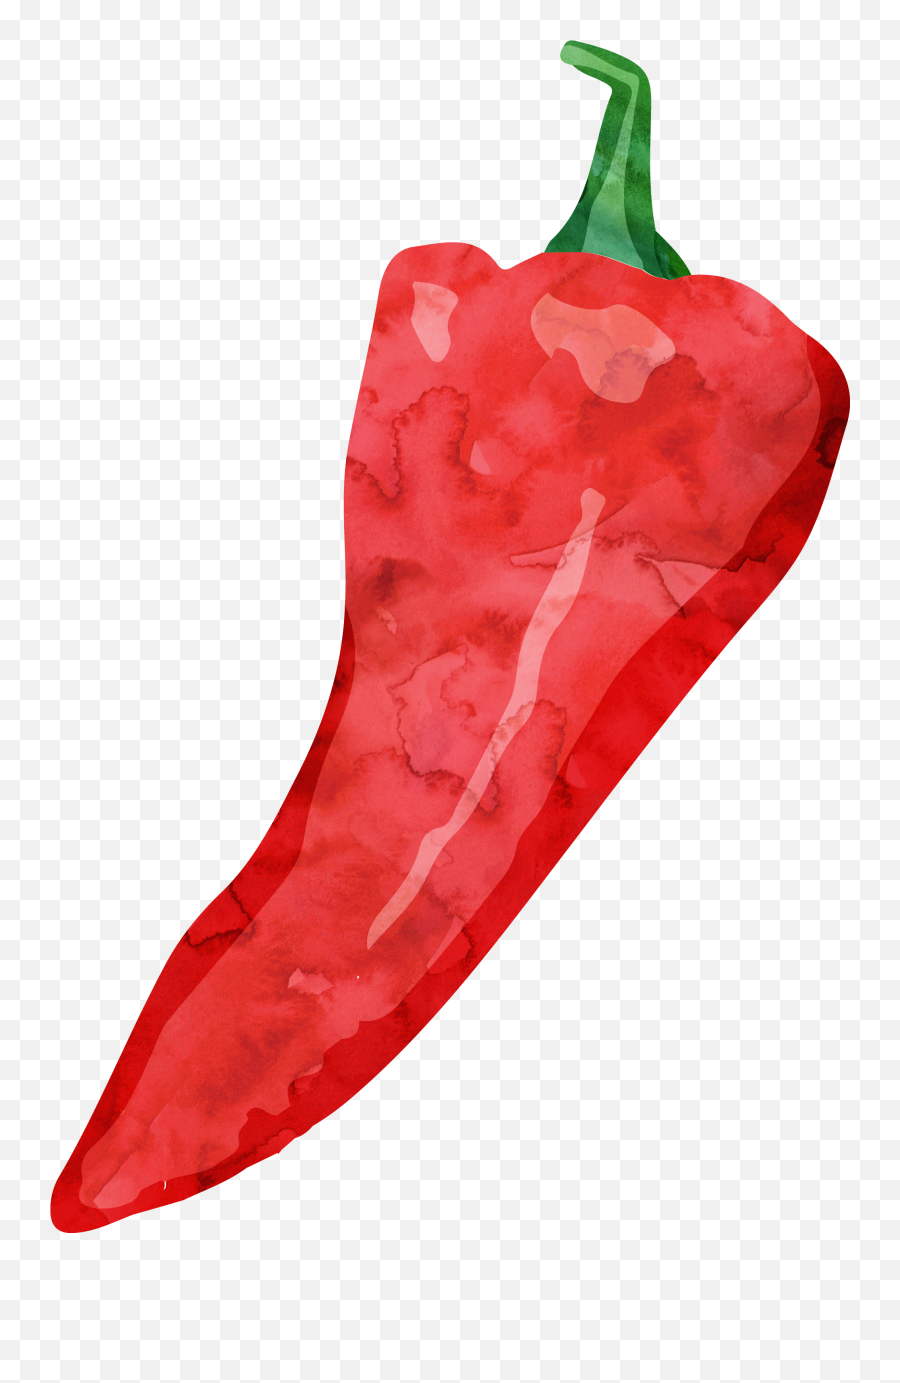 Png Royalty Free Stock Tabasco Pepper Cayenne Watercolor - Jalapeno Watercolor Pepper,Jalapeno Png